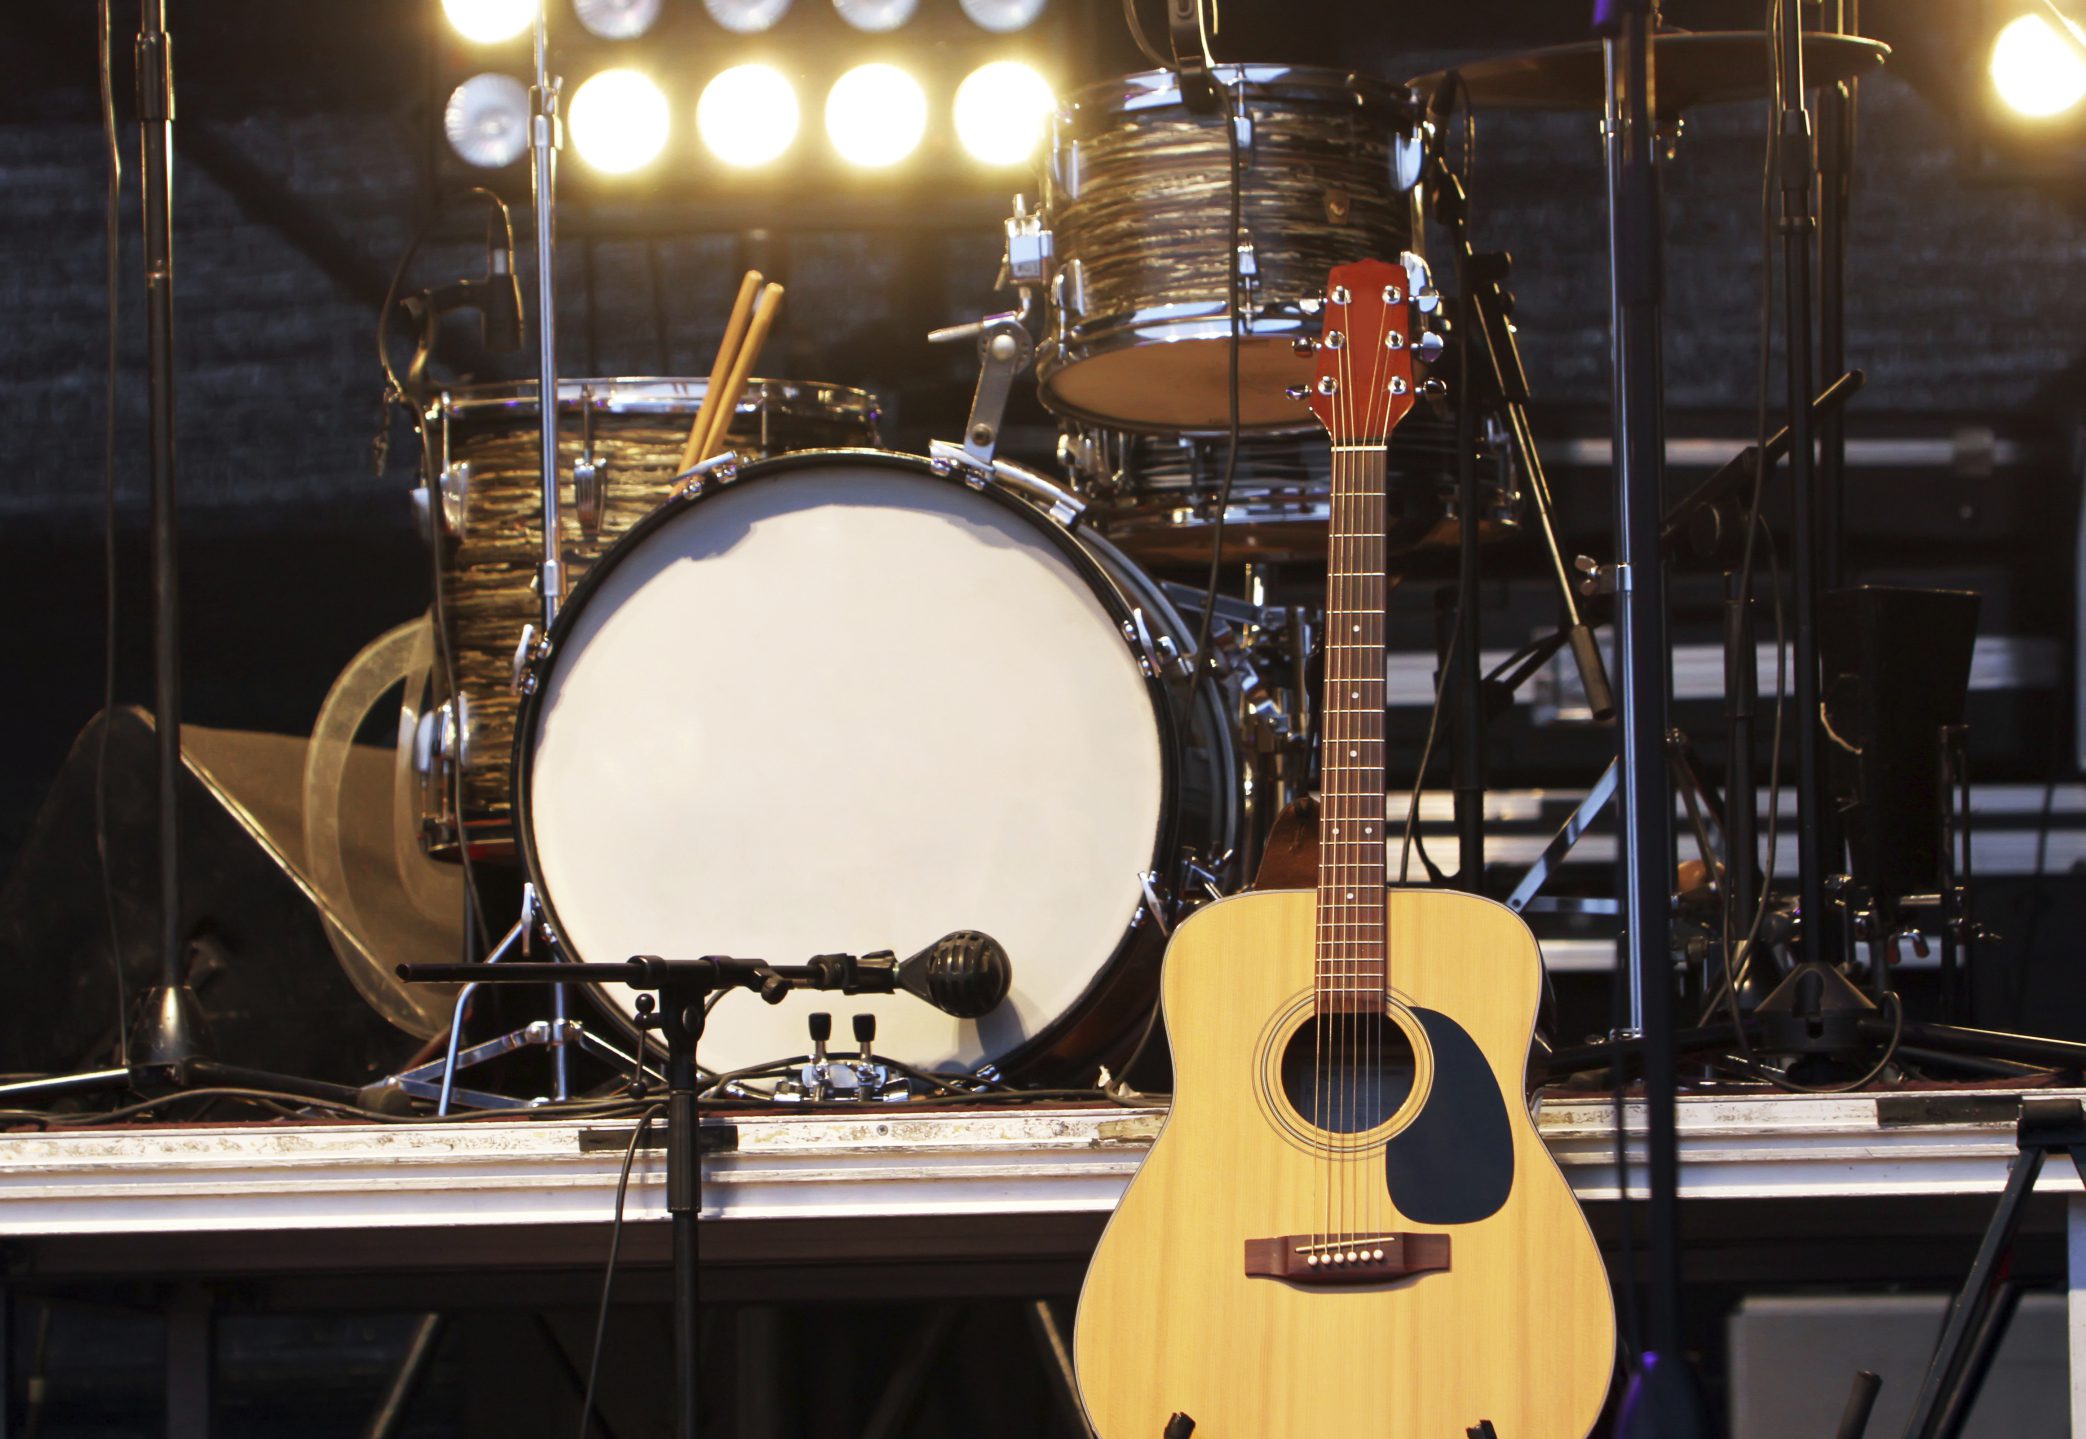 Concert stage with guitar and drum set.